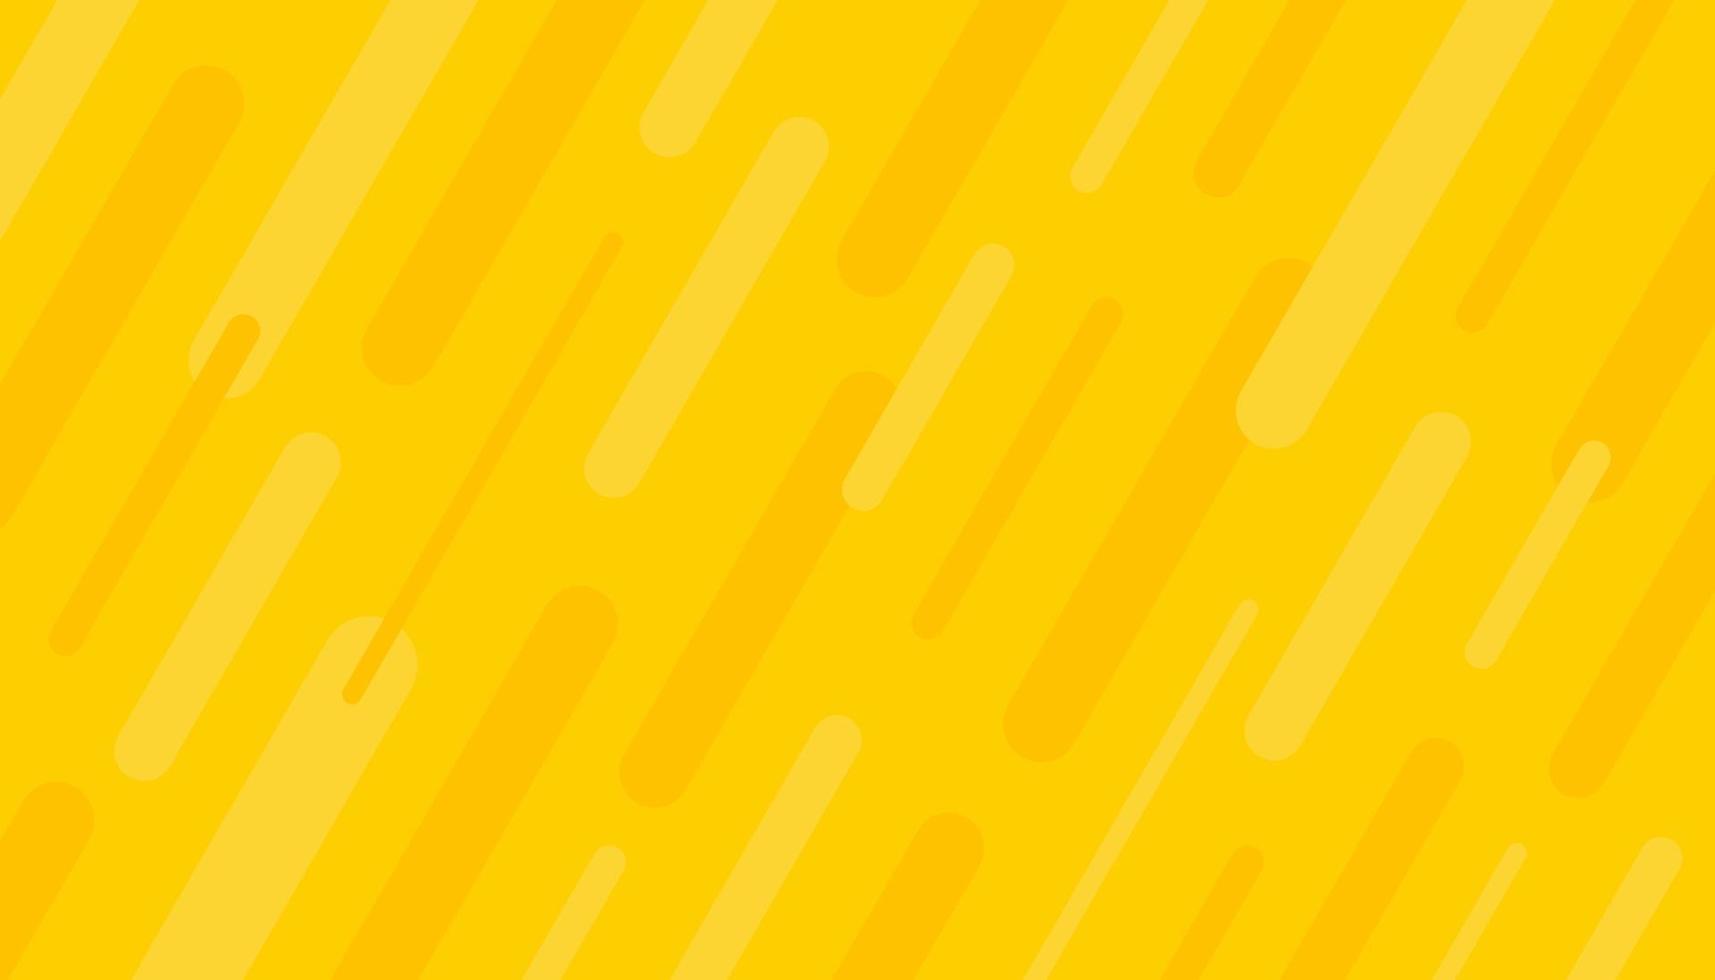 Yellow background with dynamic abstract shapes. Eps 10 vector